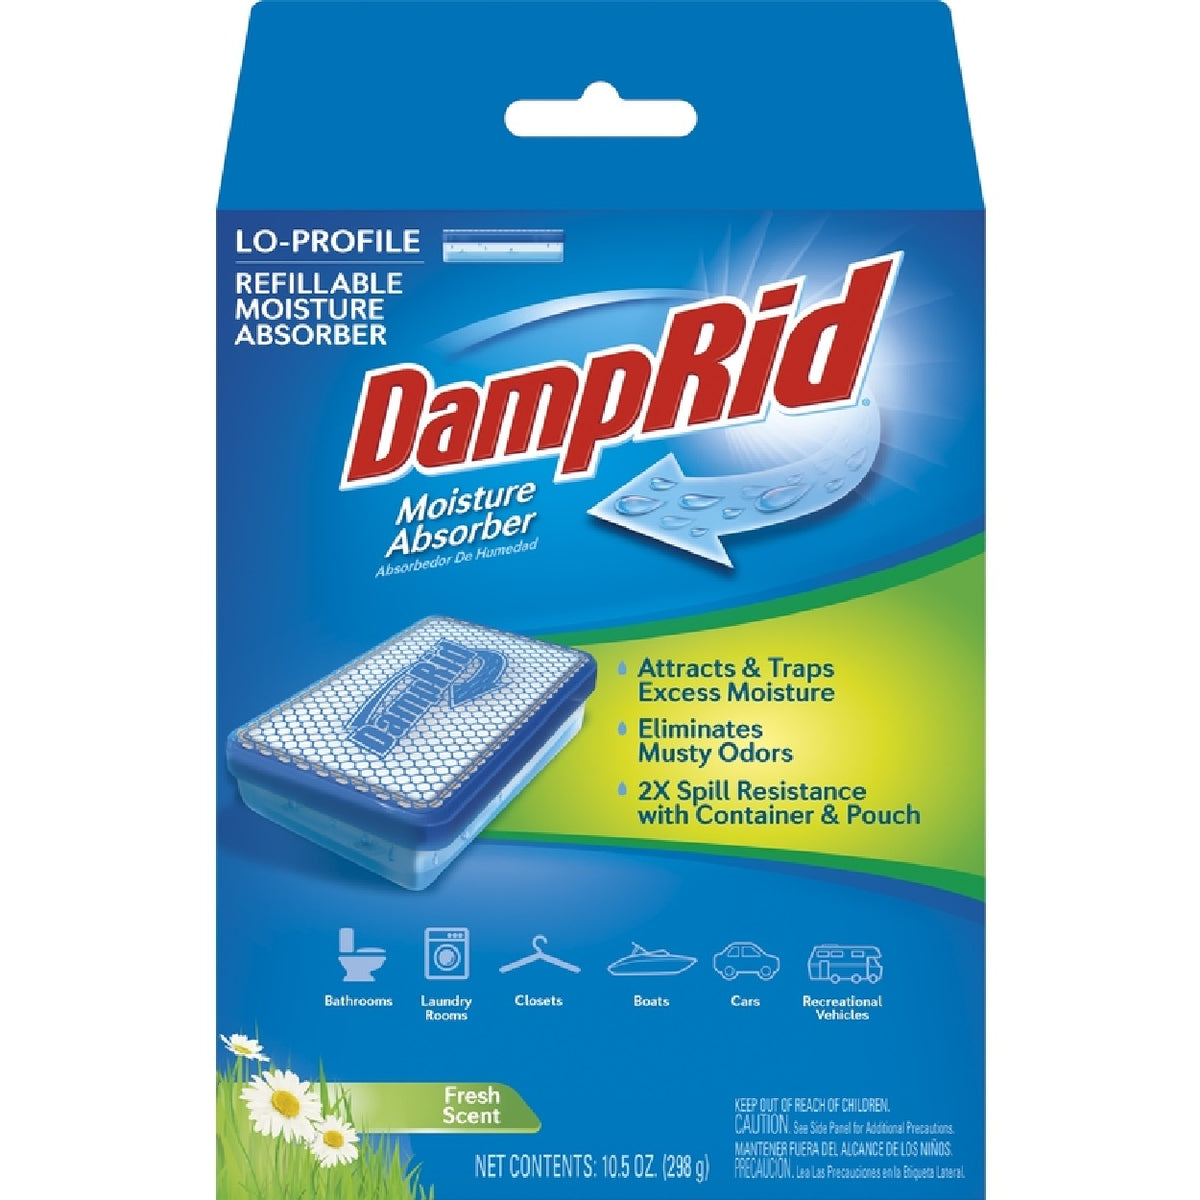 Buy damprid low profile - Online store for cleaning supplies, moisture control in USA, on sale, low price, discount deals, coupon code